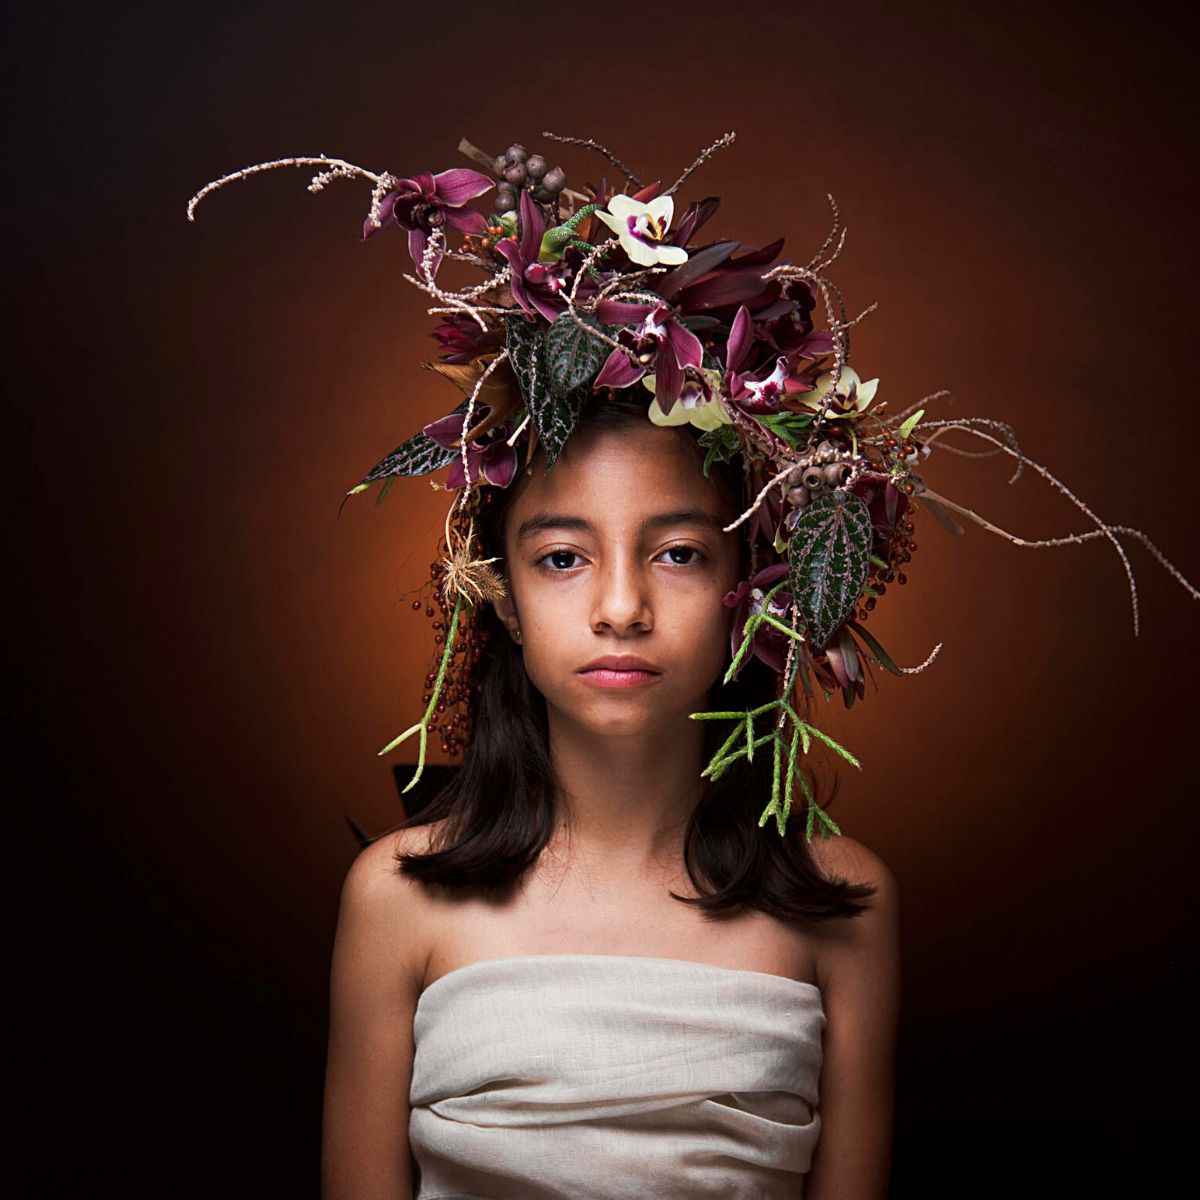 Floral Design Inspired by Nature, Emotions and Memories by Orit Hertz With her Daughter Featured on Thursd